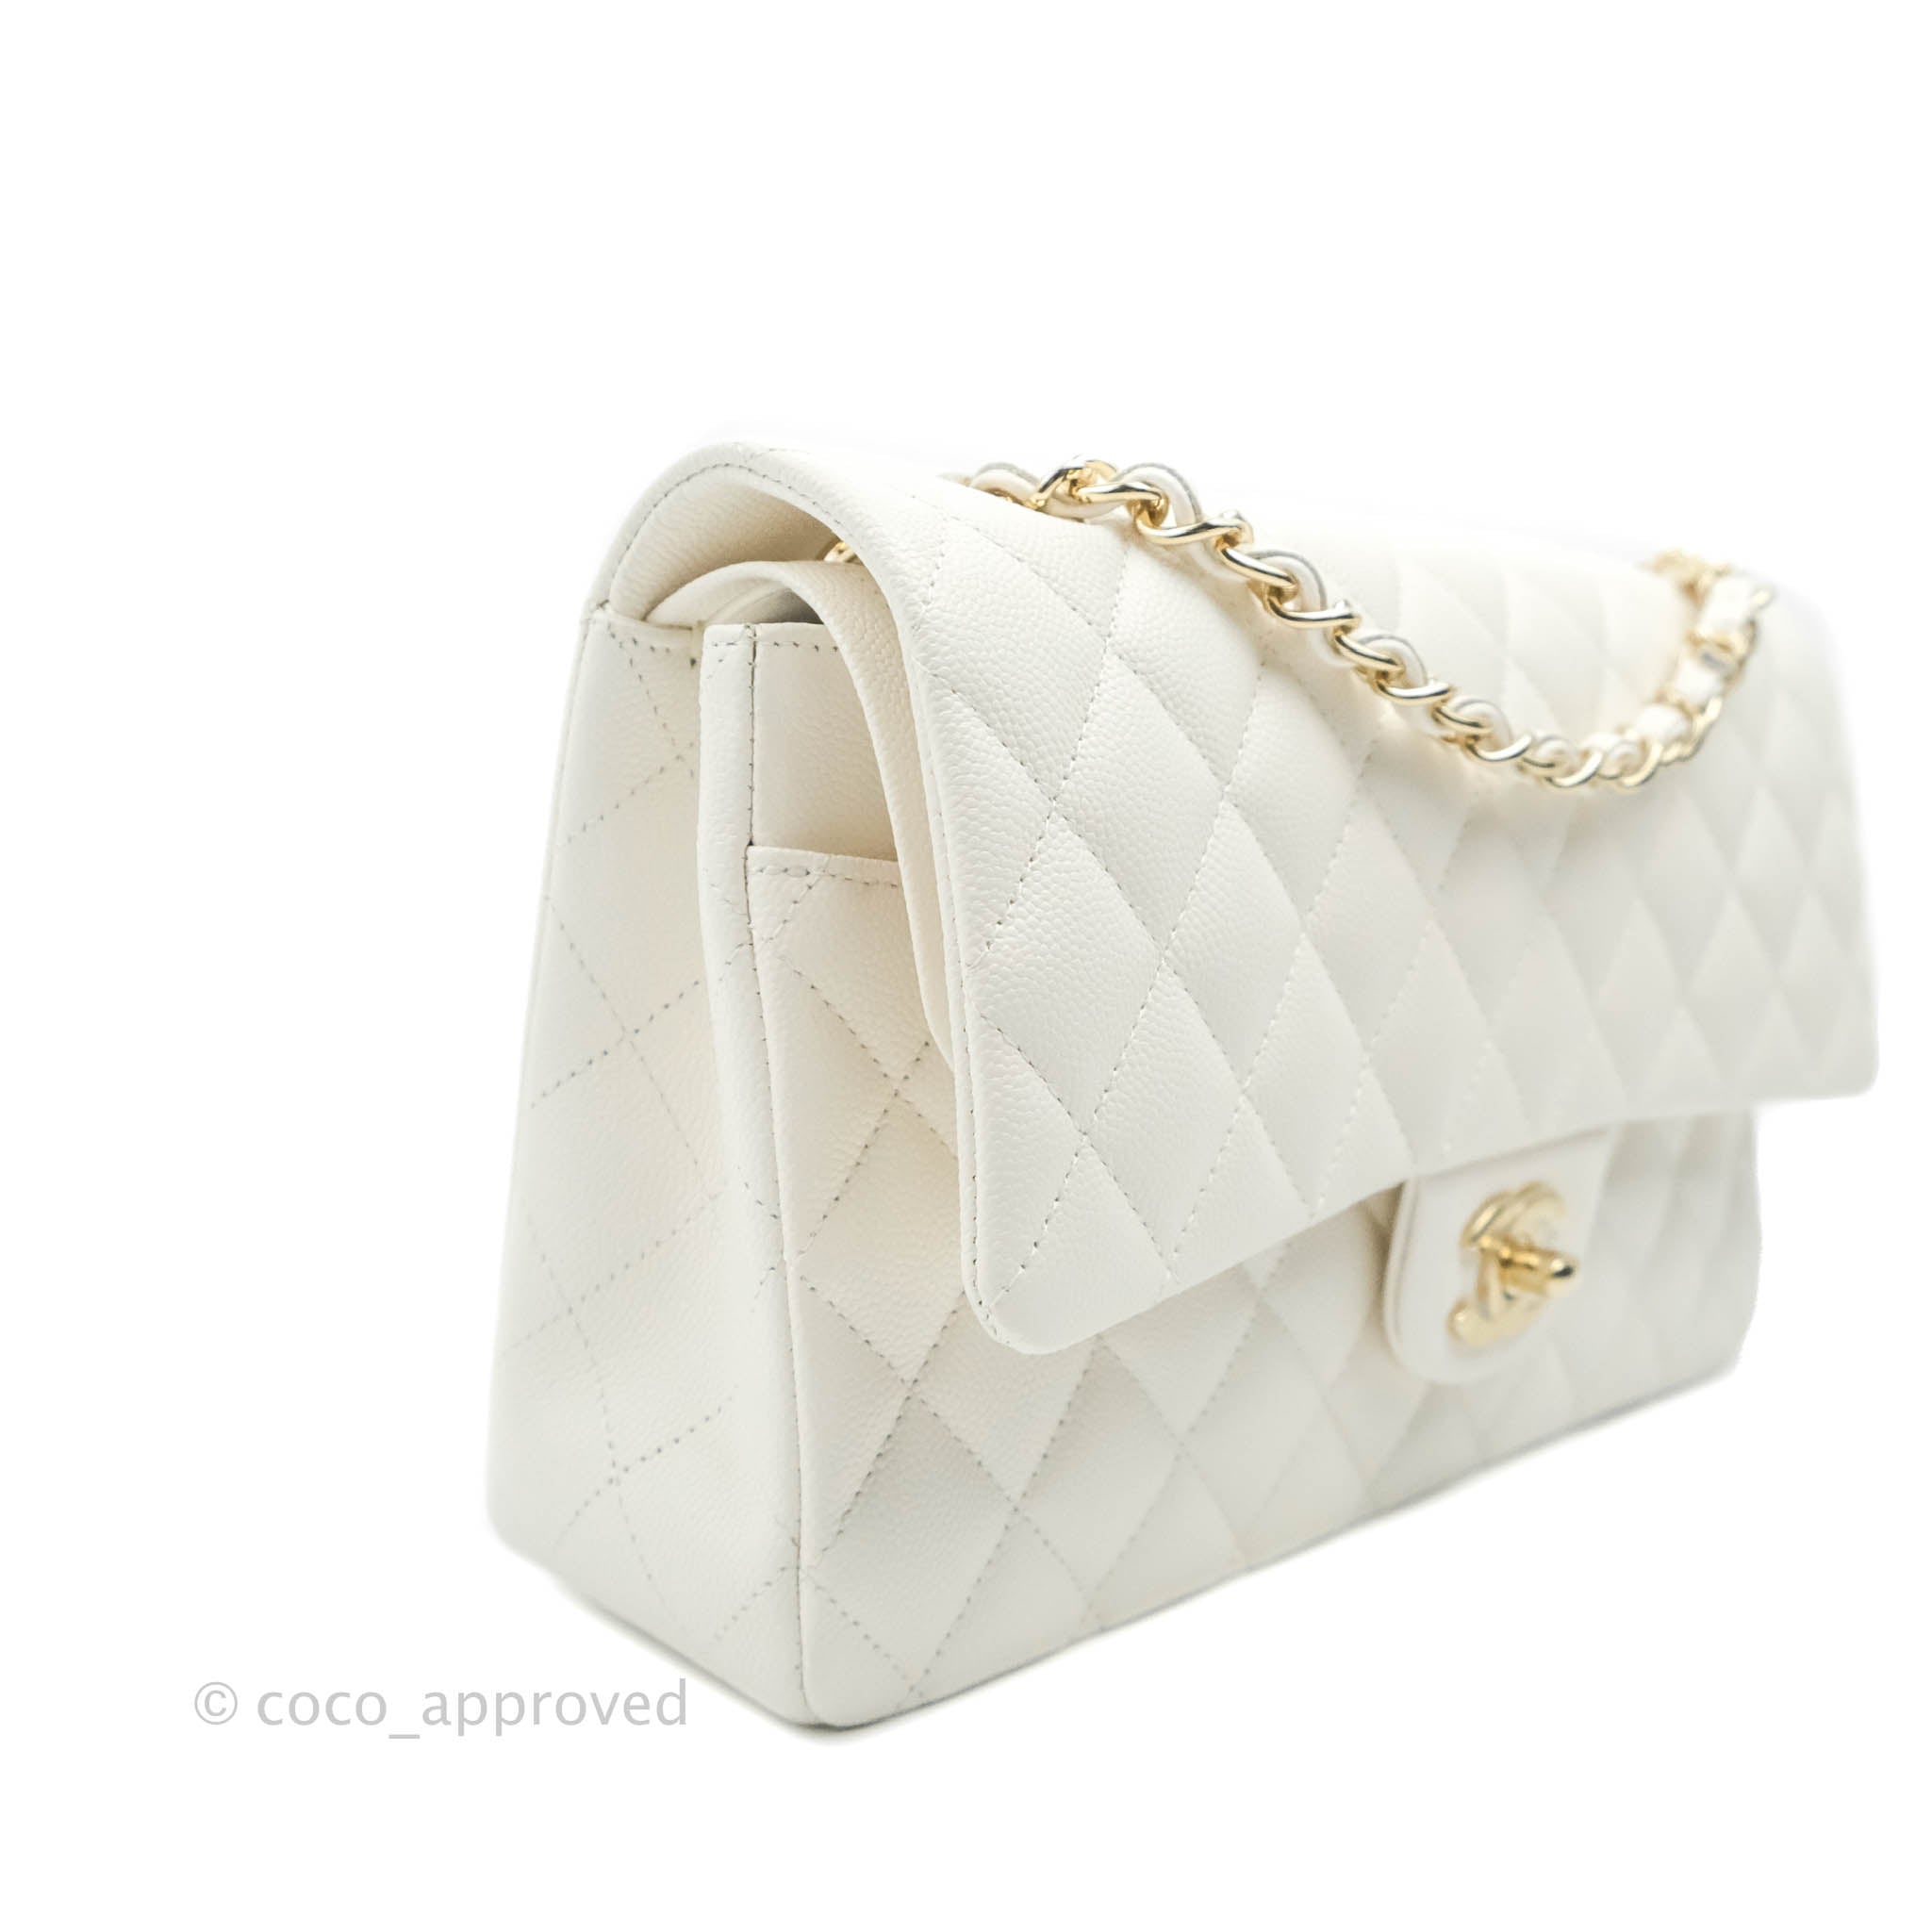 CHANEL Medium Boy White Flap Caviar Quilted Bag (Limited Edition) - Bellisa